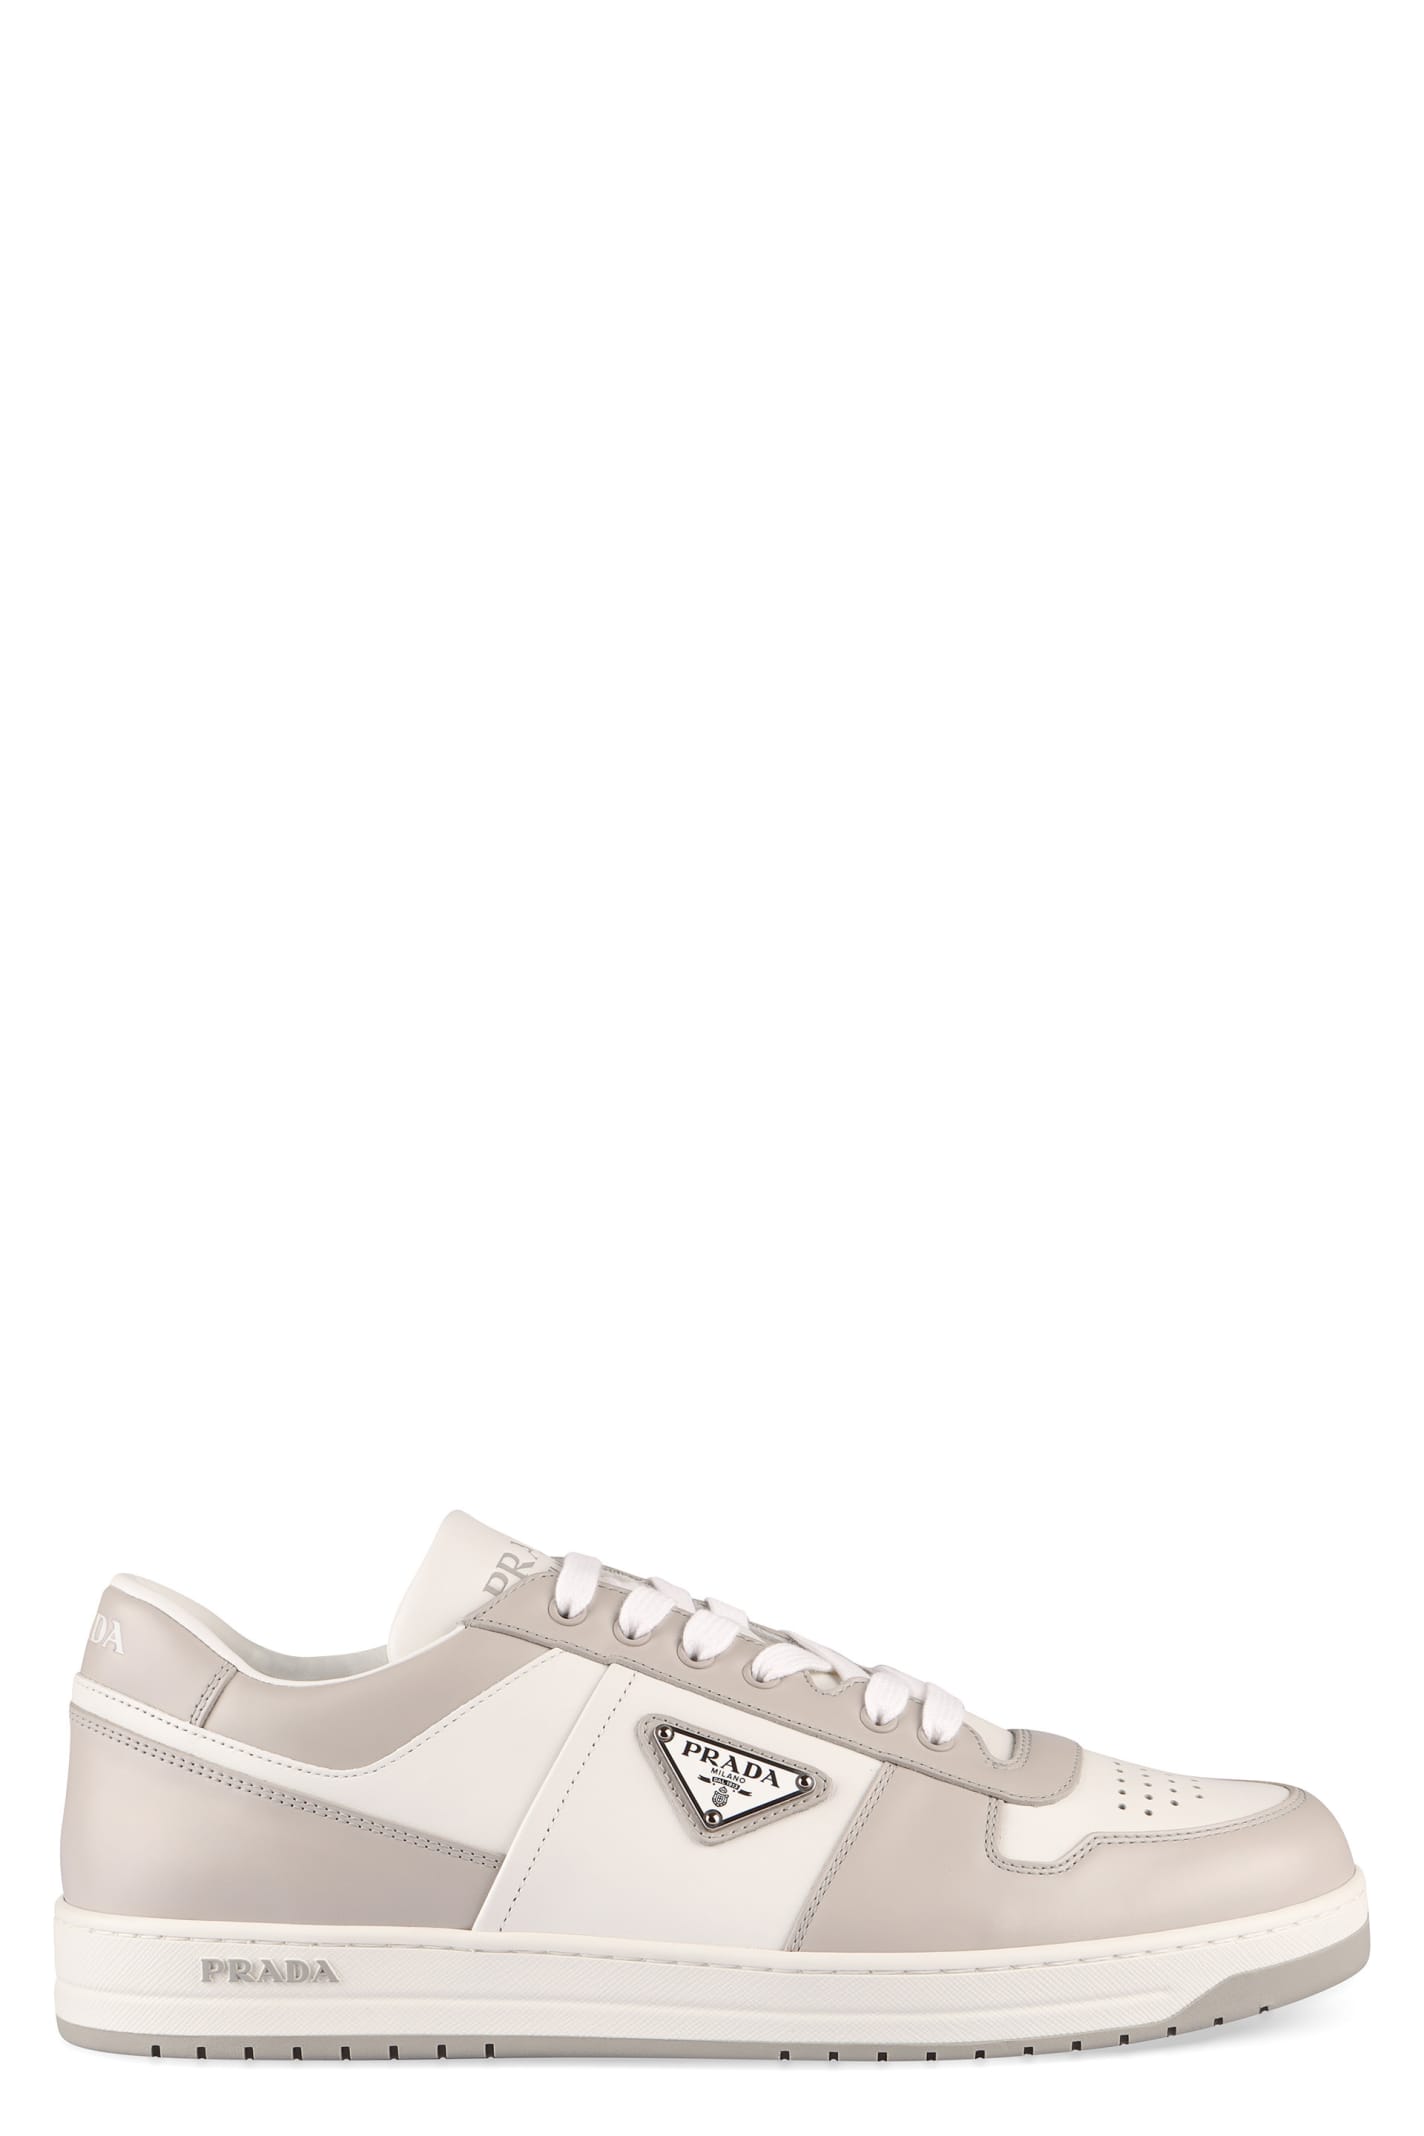 Prada Downtown Leather Low-top Sneakers In Neutral